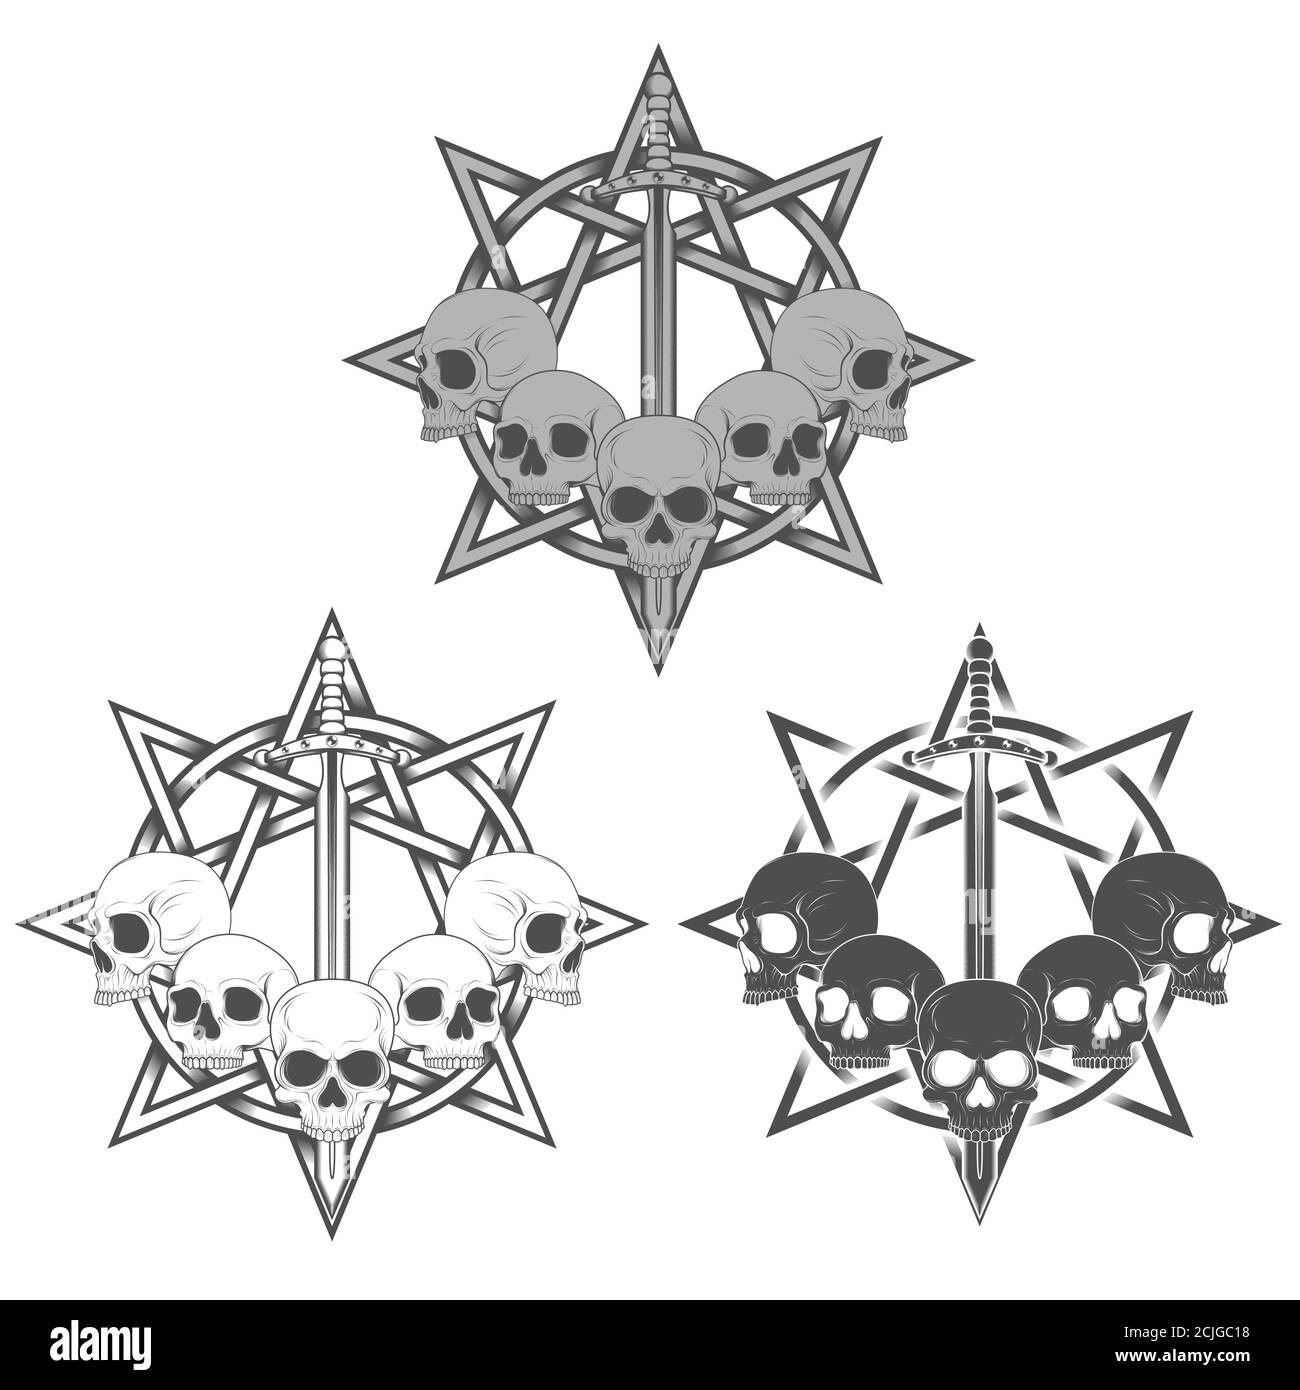 Illustration of skulls with sword and 8-pointed star in the background, traditional art, grayscale Stock Vector